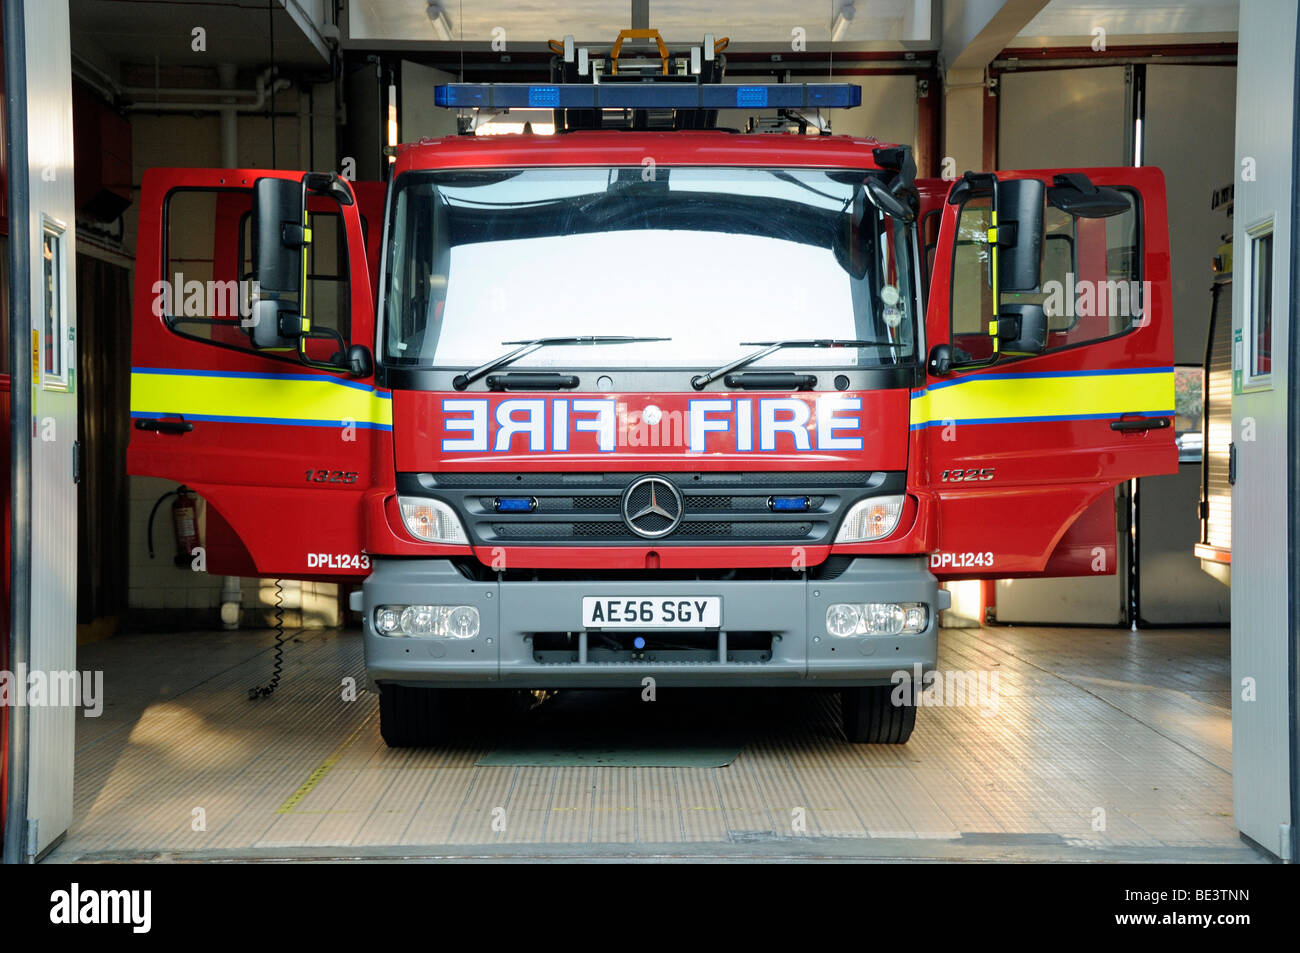 Fire Engine inside fire station with doors open London England UK Stock Photo